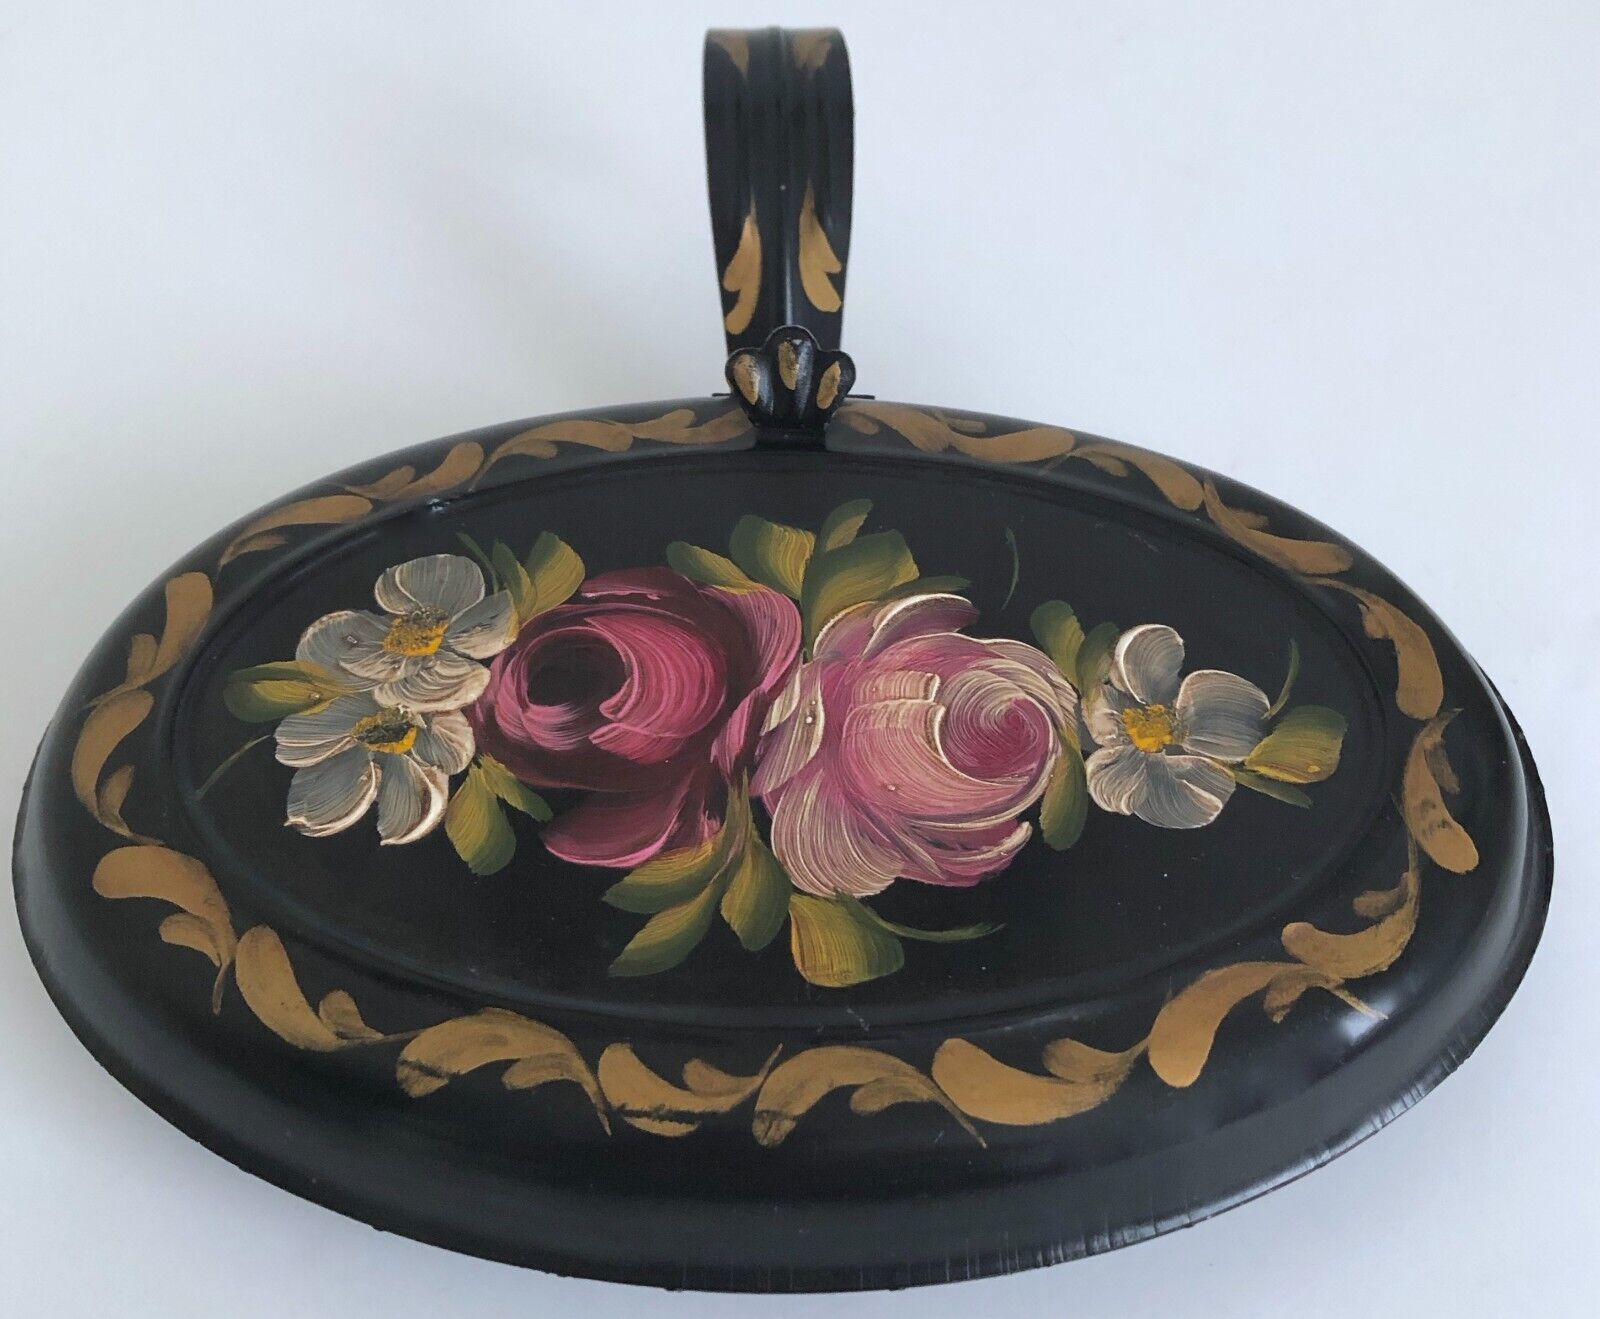 SILENT BUTLER VINTAGE CRUMB CATCHER HAND PAINTED TOLEWARE FLORAL PATTERN